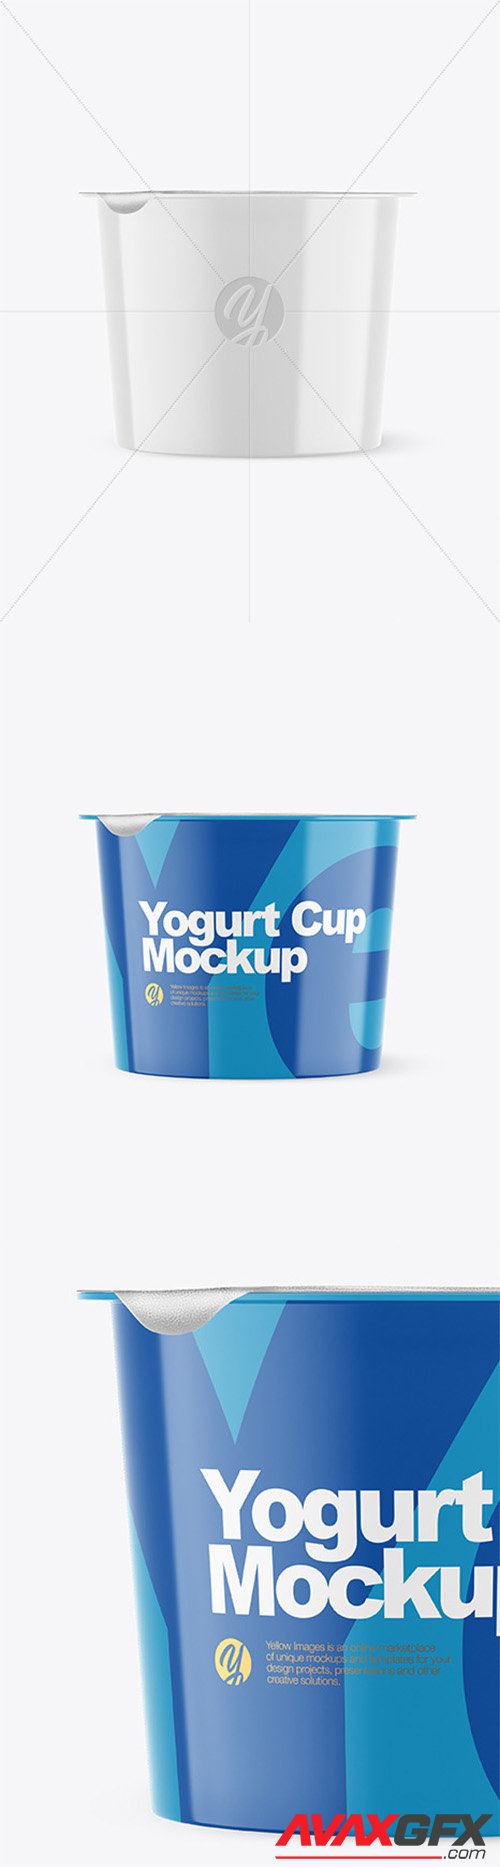 Download Metallic Yogurt Cup With Foil Lid Mockup Front View 66464 Avaxgfx All Downloads That You Need In One Place Graphic From Nitroflare Rapidgator Yellowimages Mockups